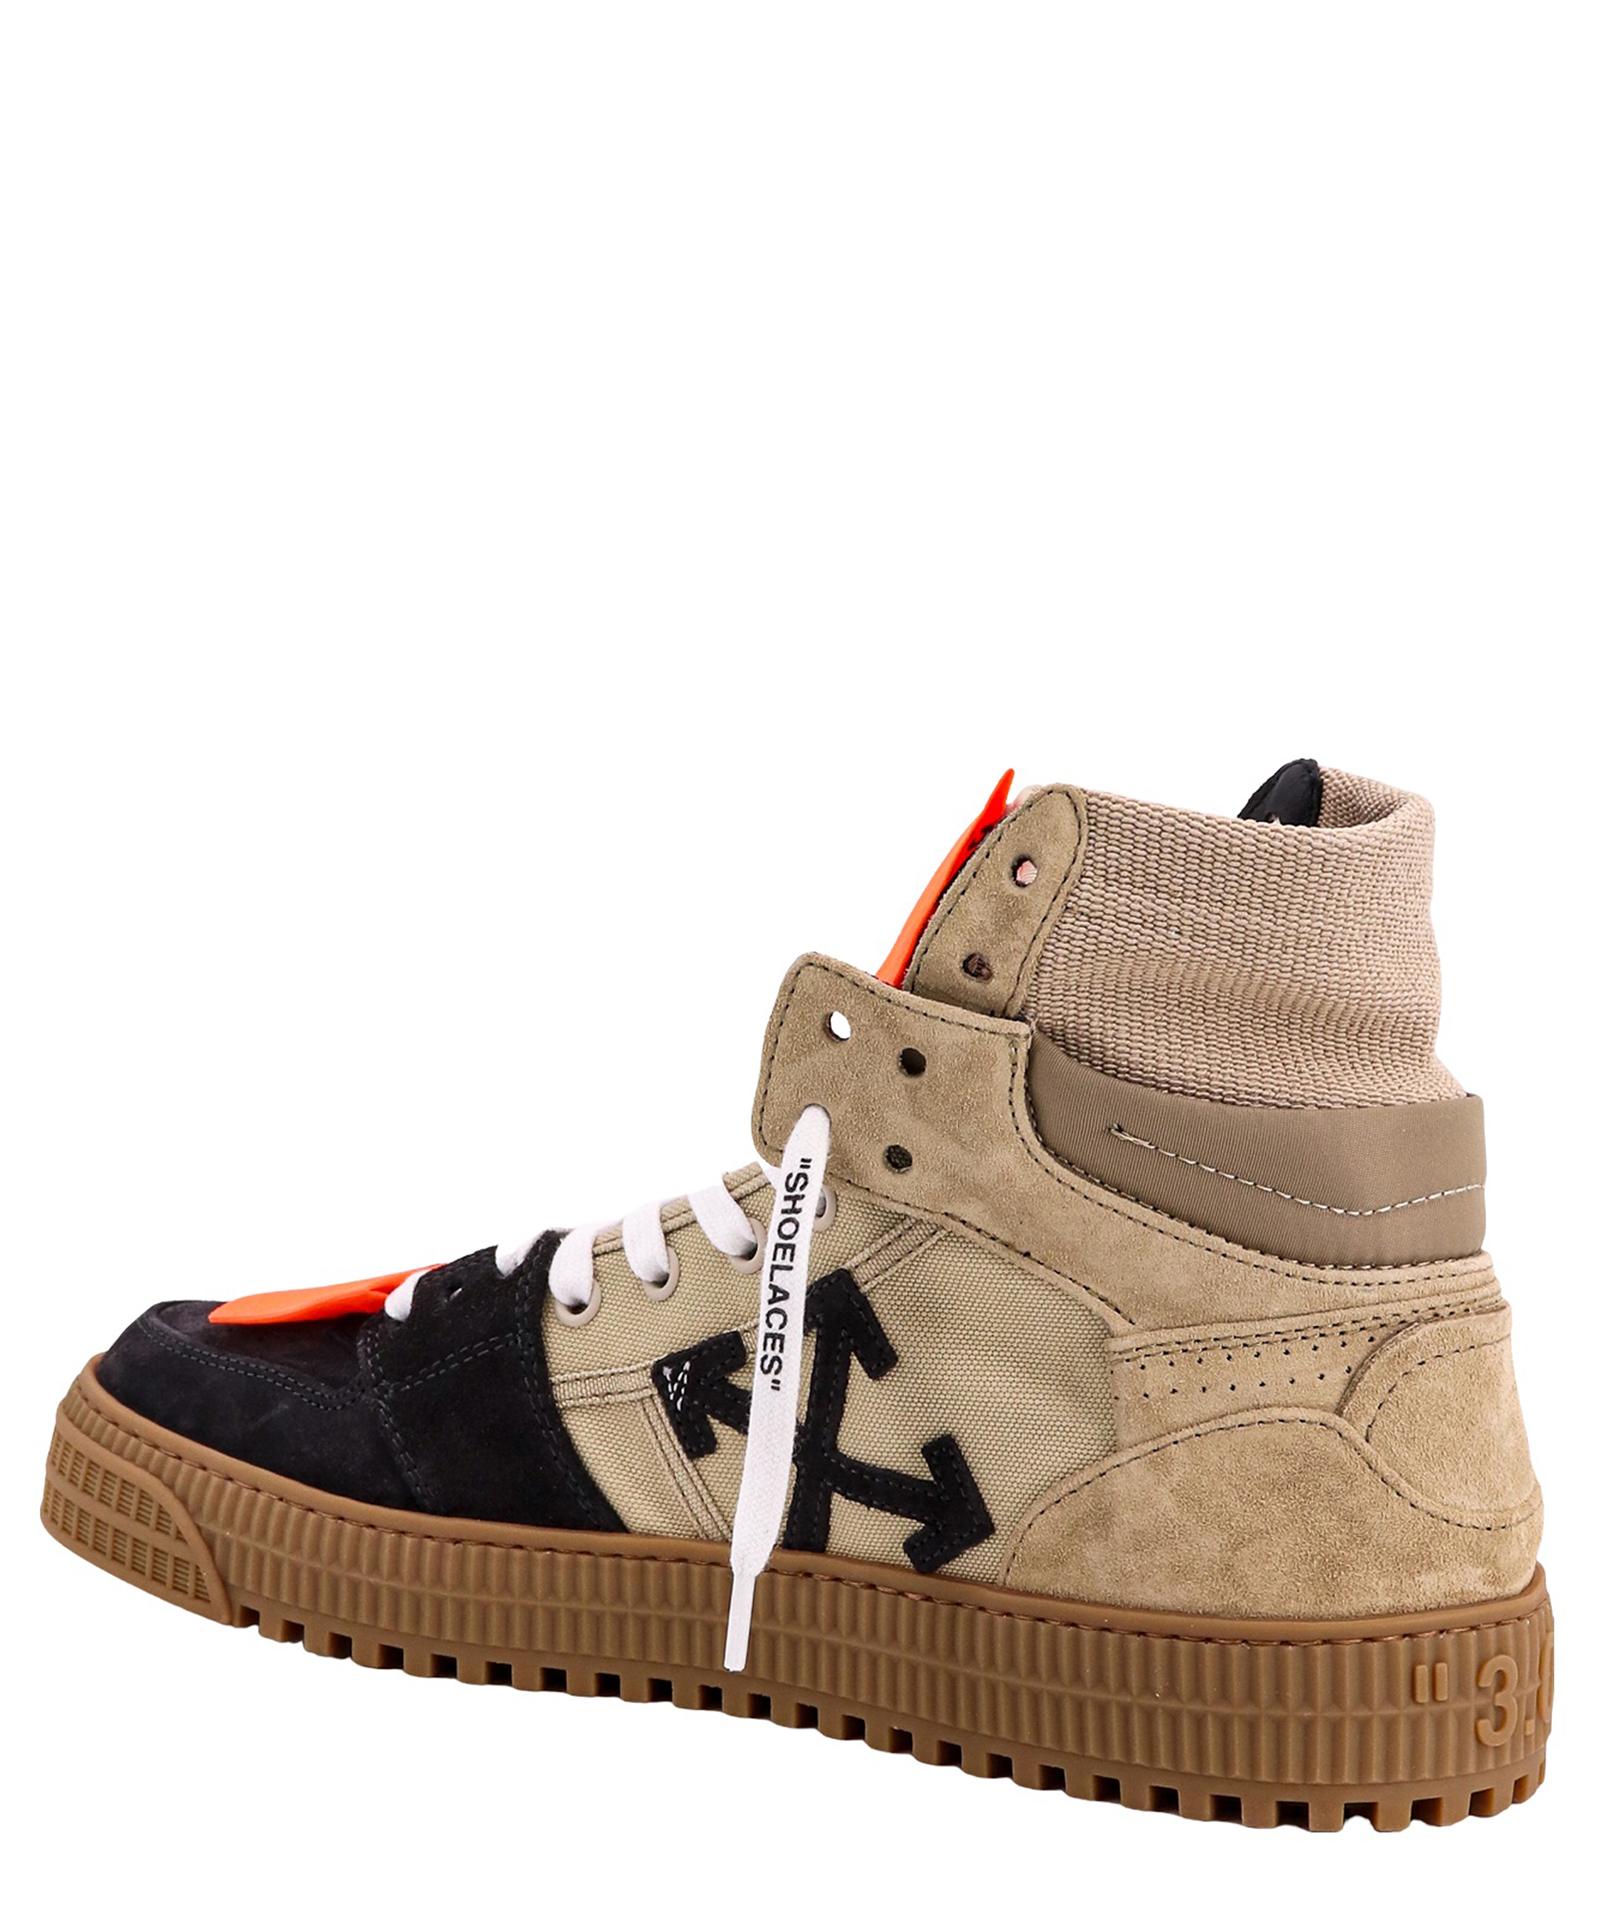 Off-White c/o Virgil Abloh Rounded Toe Lace-up Sneakers in Brown for Men